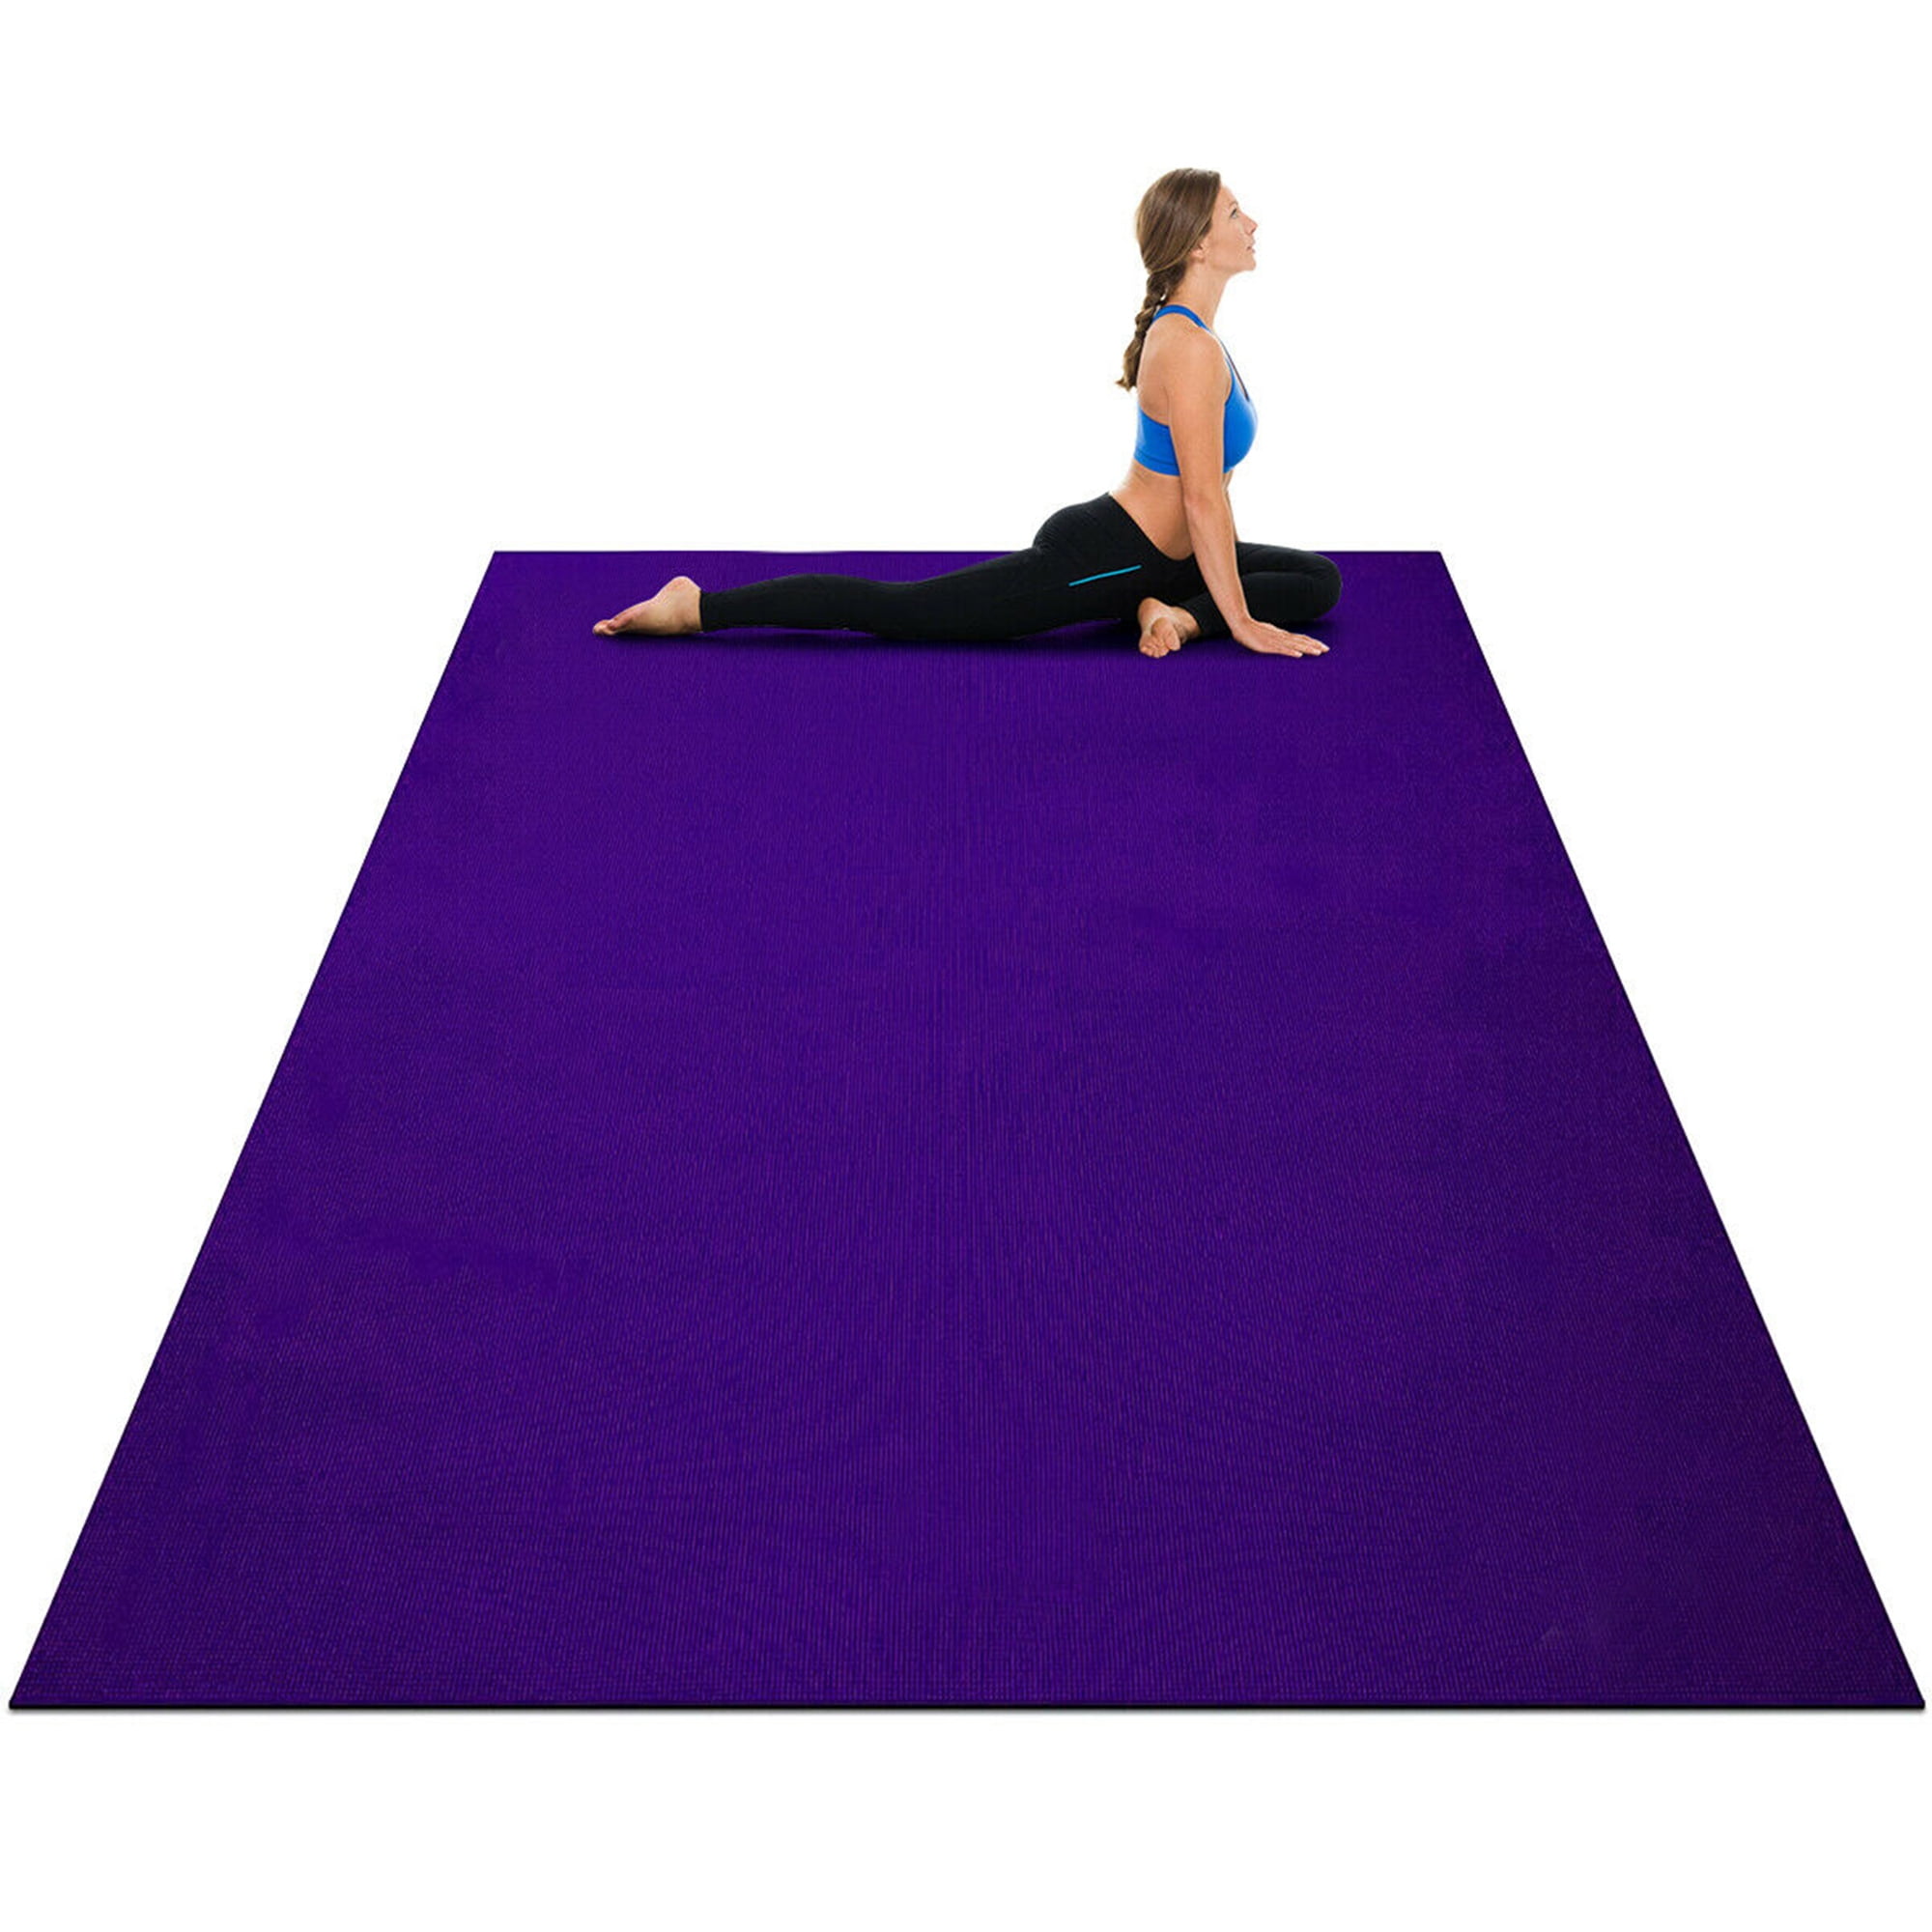 Non-slip Yoga Mat for Fitness at home Gym Living Room 4mm Padded Mat Comfortable 